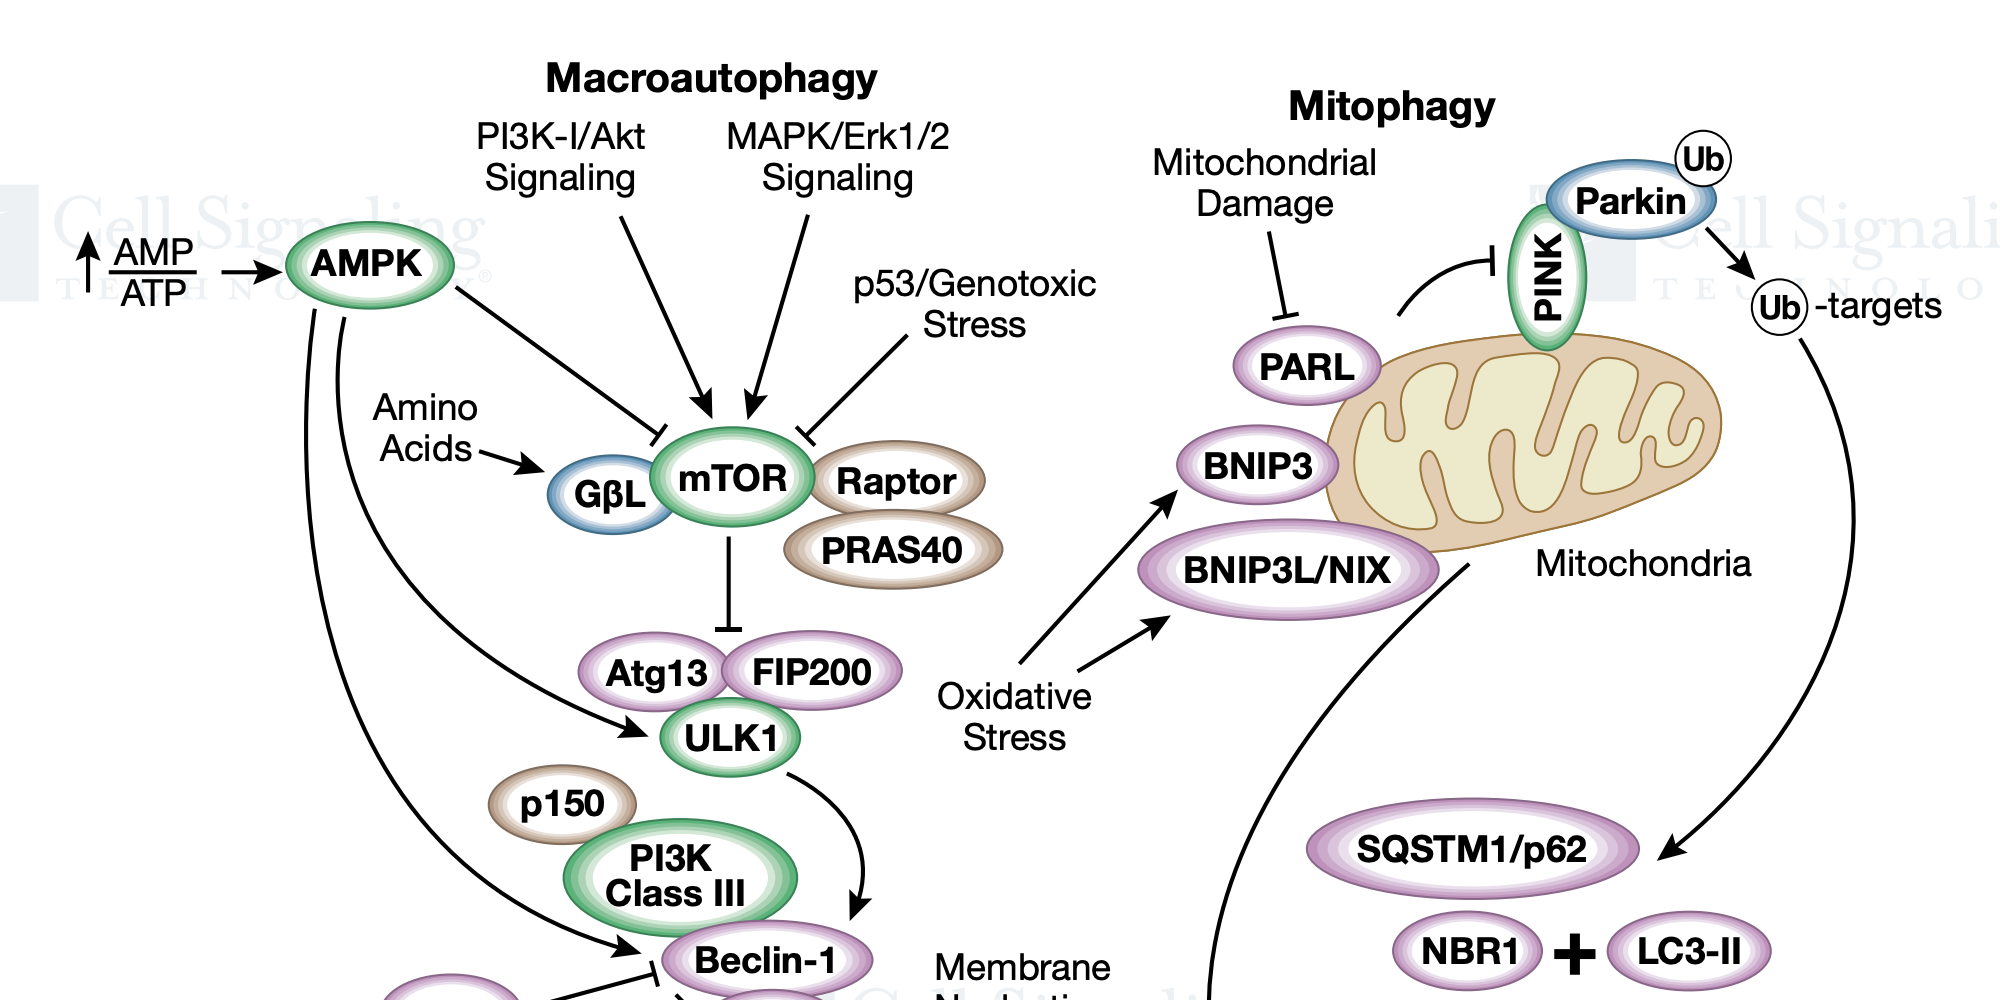 The effects of Nelfinavir on ER stress, metabolic stress and autophagy